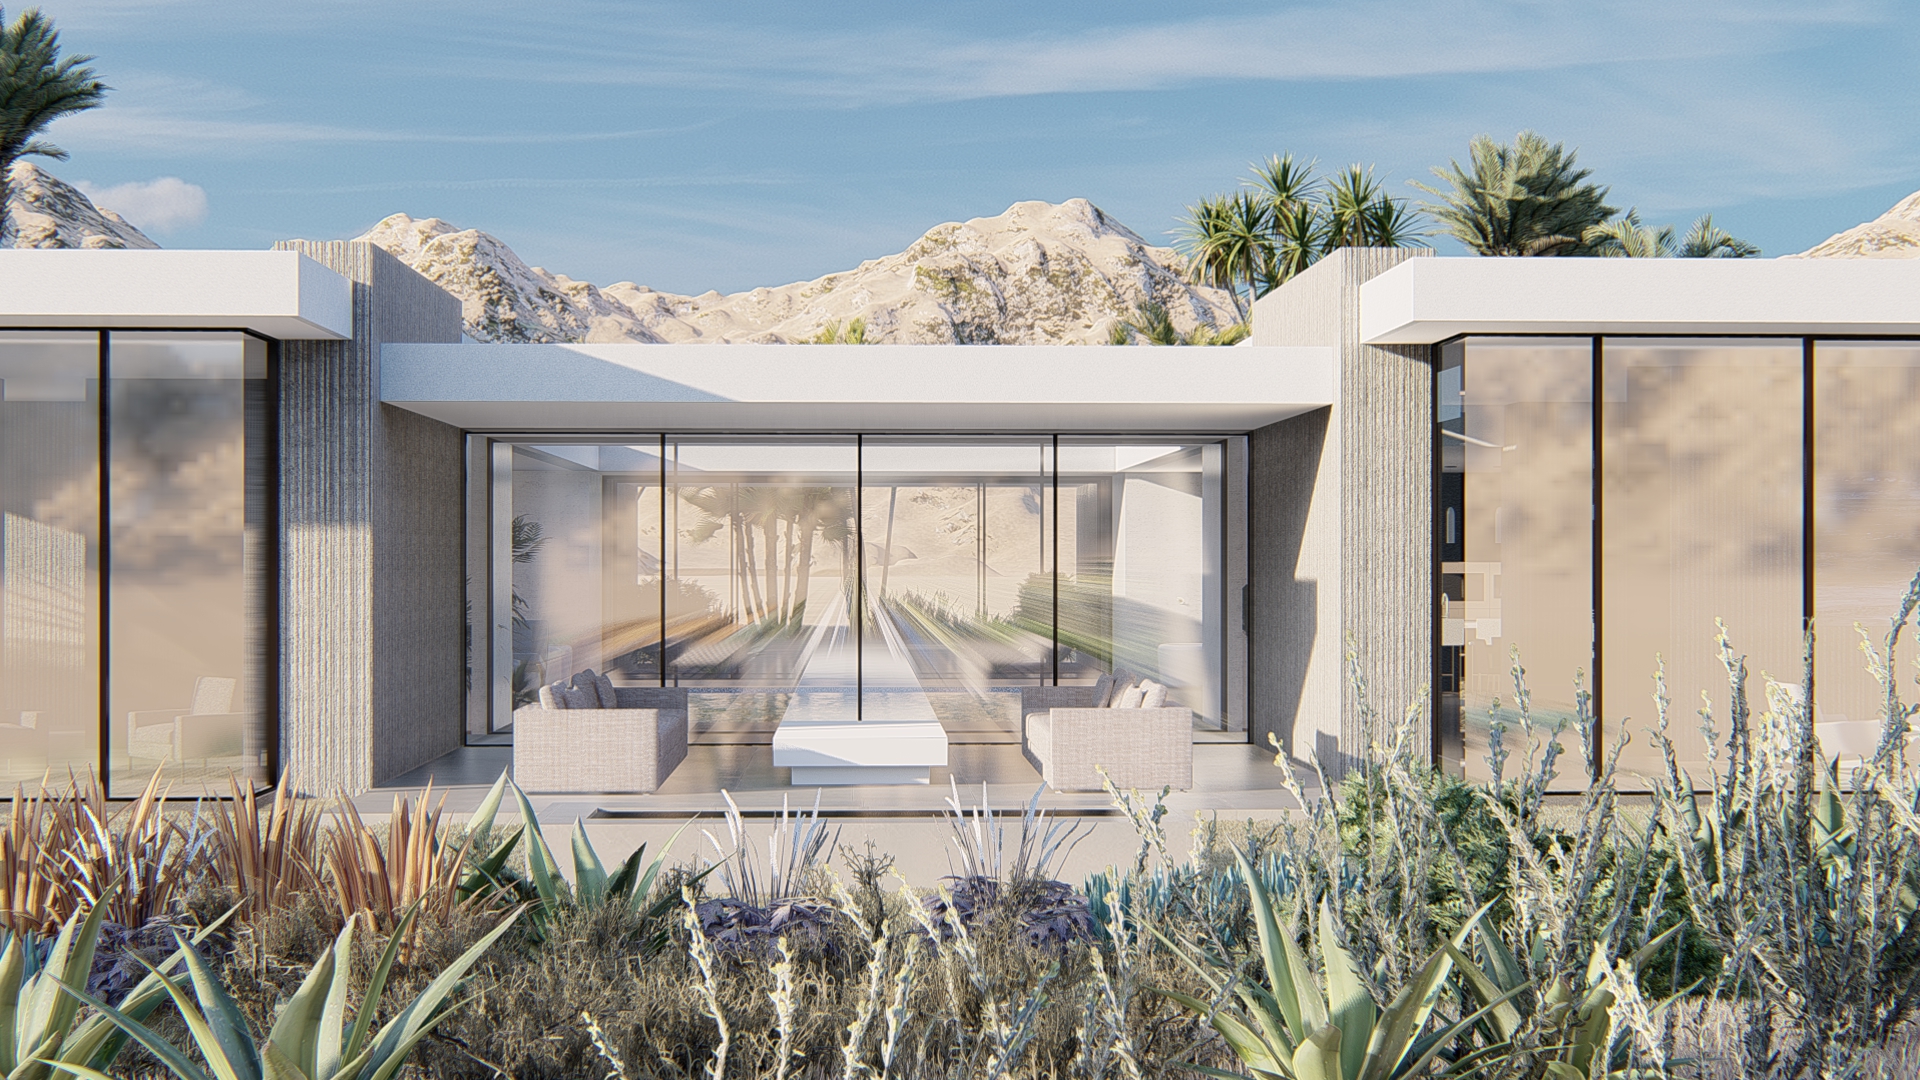 Paolo-Volpis-Architect-california-arizona-nevada-desert-house-modern-white-minimalist-wood-slats-teak-glass-concrete-water-feature-roof-garden-flat-roof-metal-steel-structure-with (31).jpg